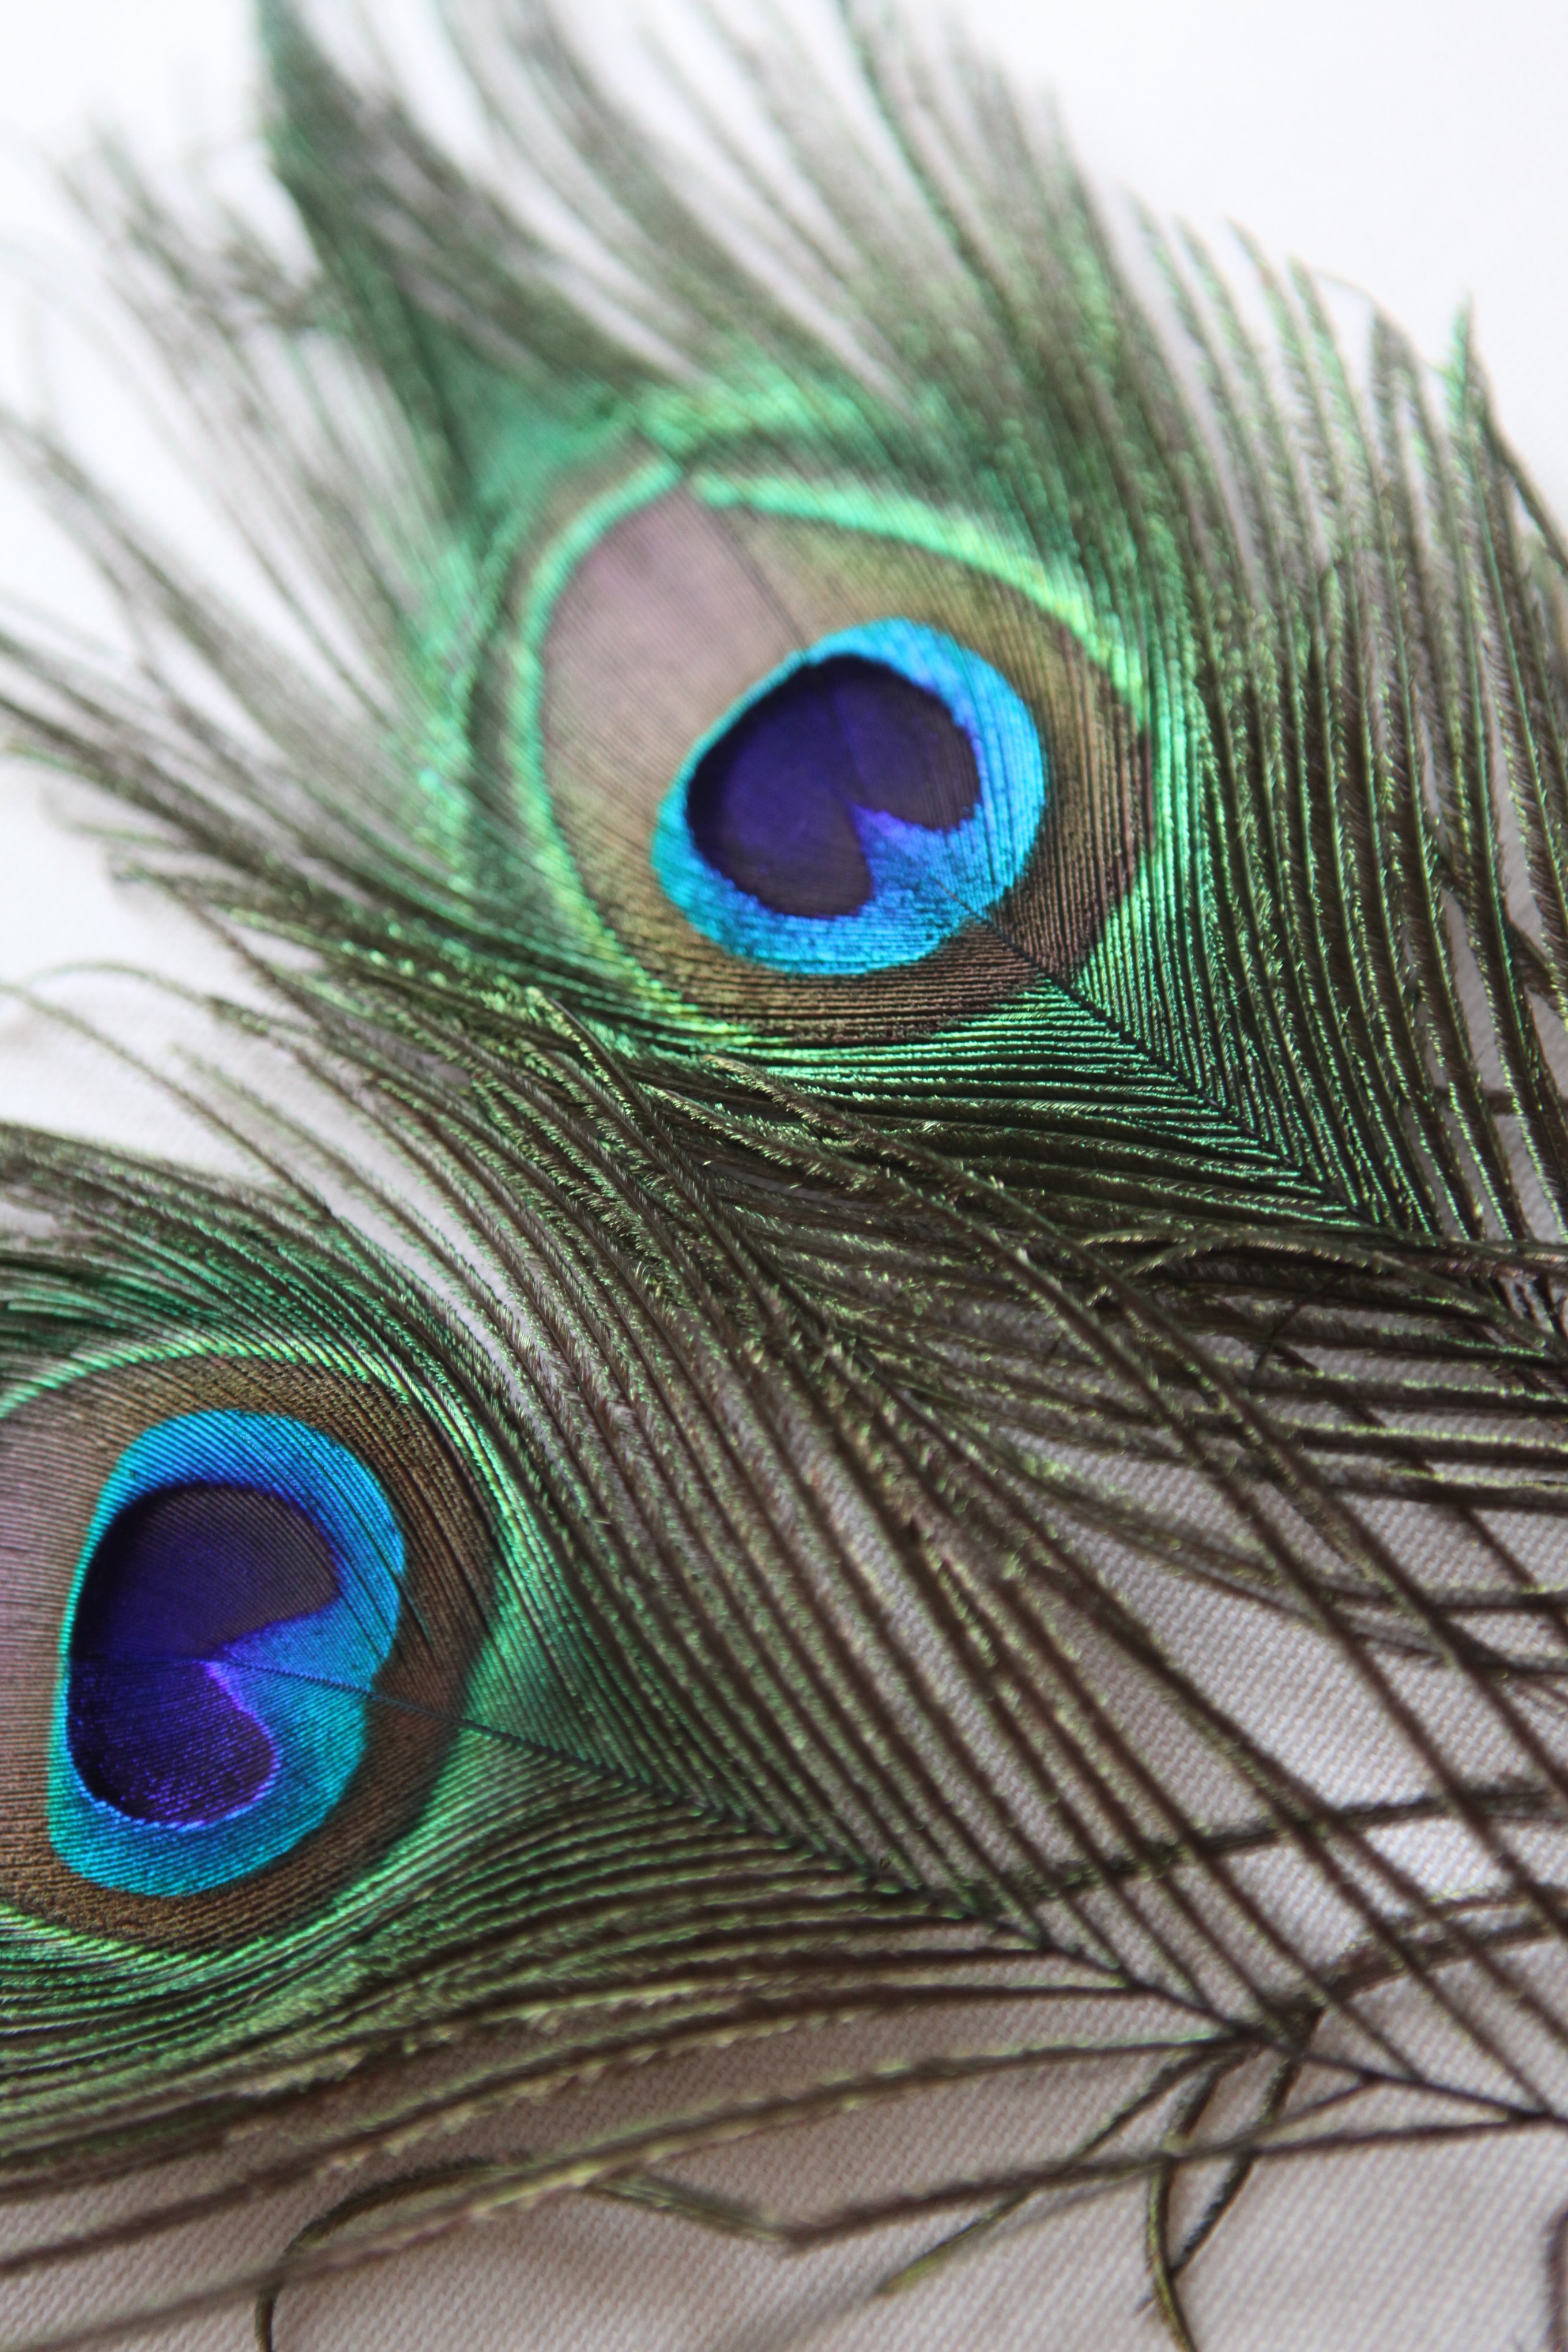 How to Attach Peacock Feathers to Tulle (with Pictures) | eHow